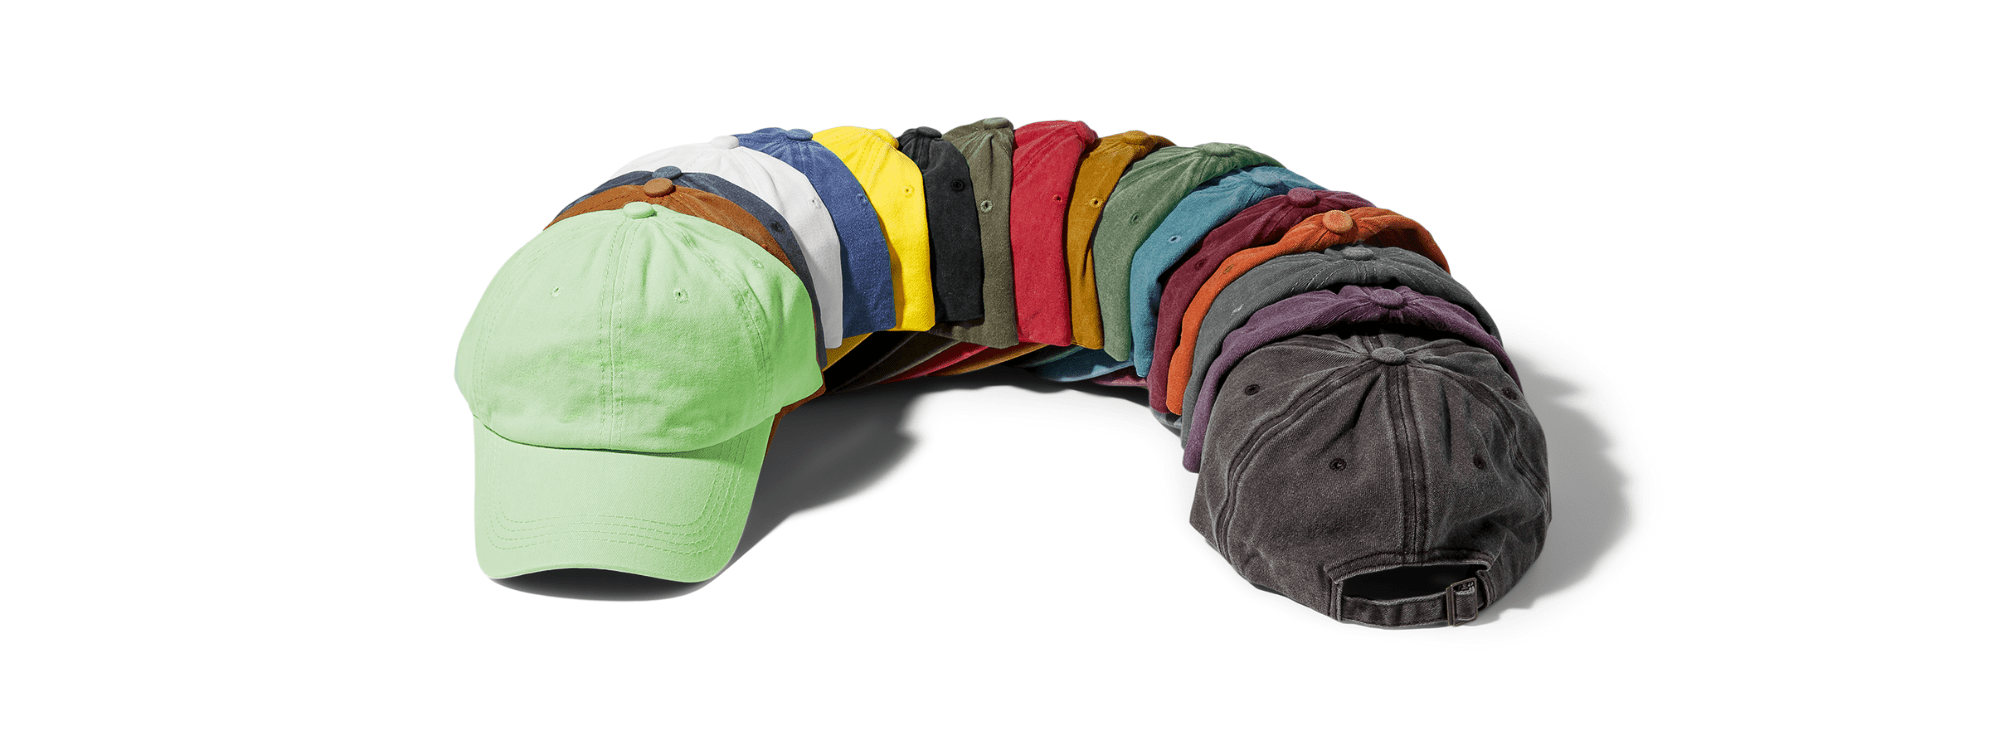 How to Clean Your Hat from Sweat Stains - Lift Down